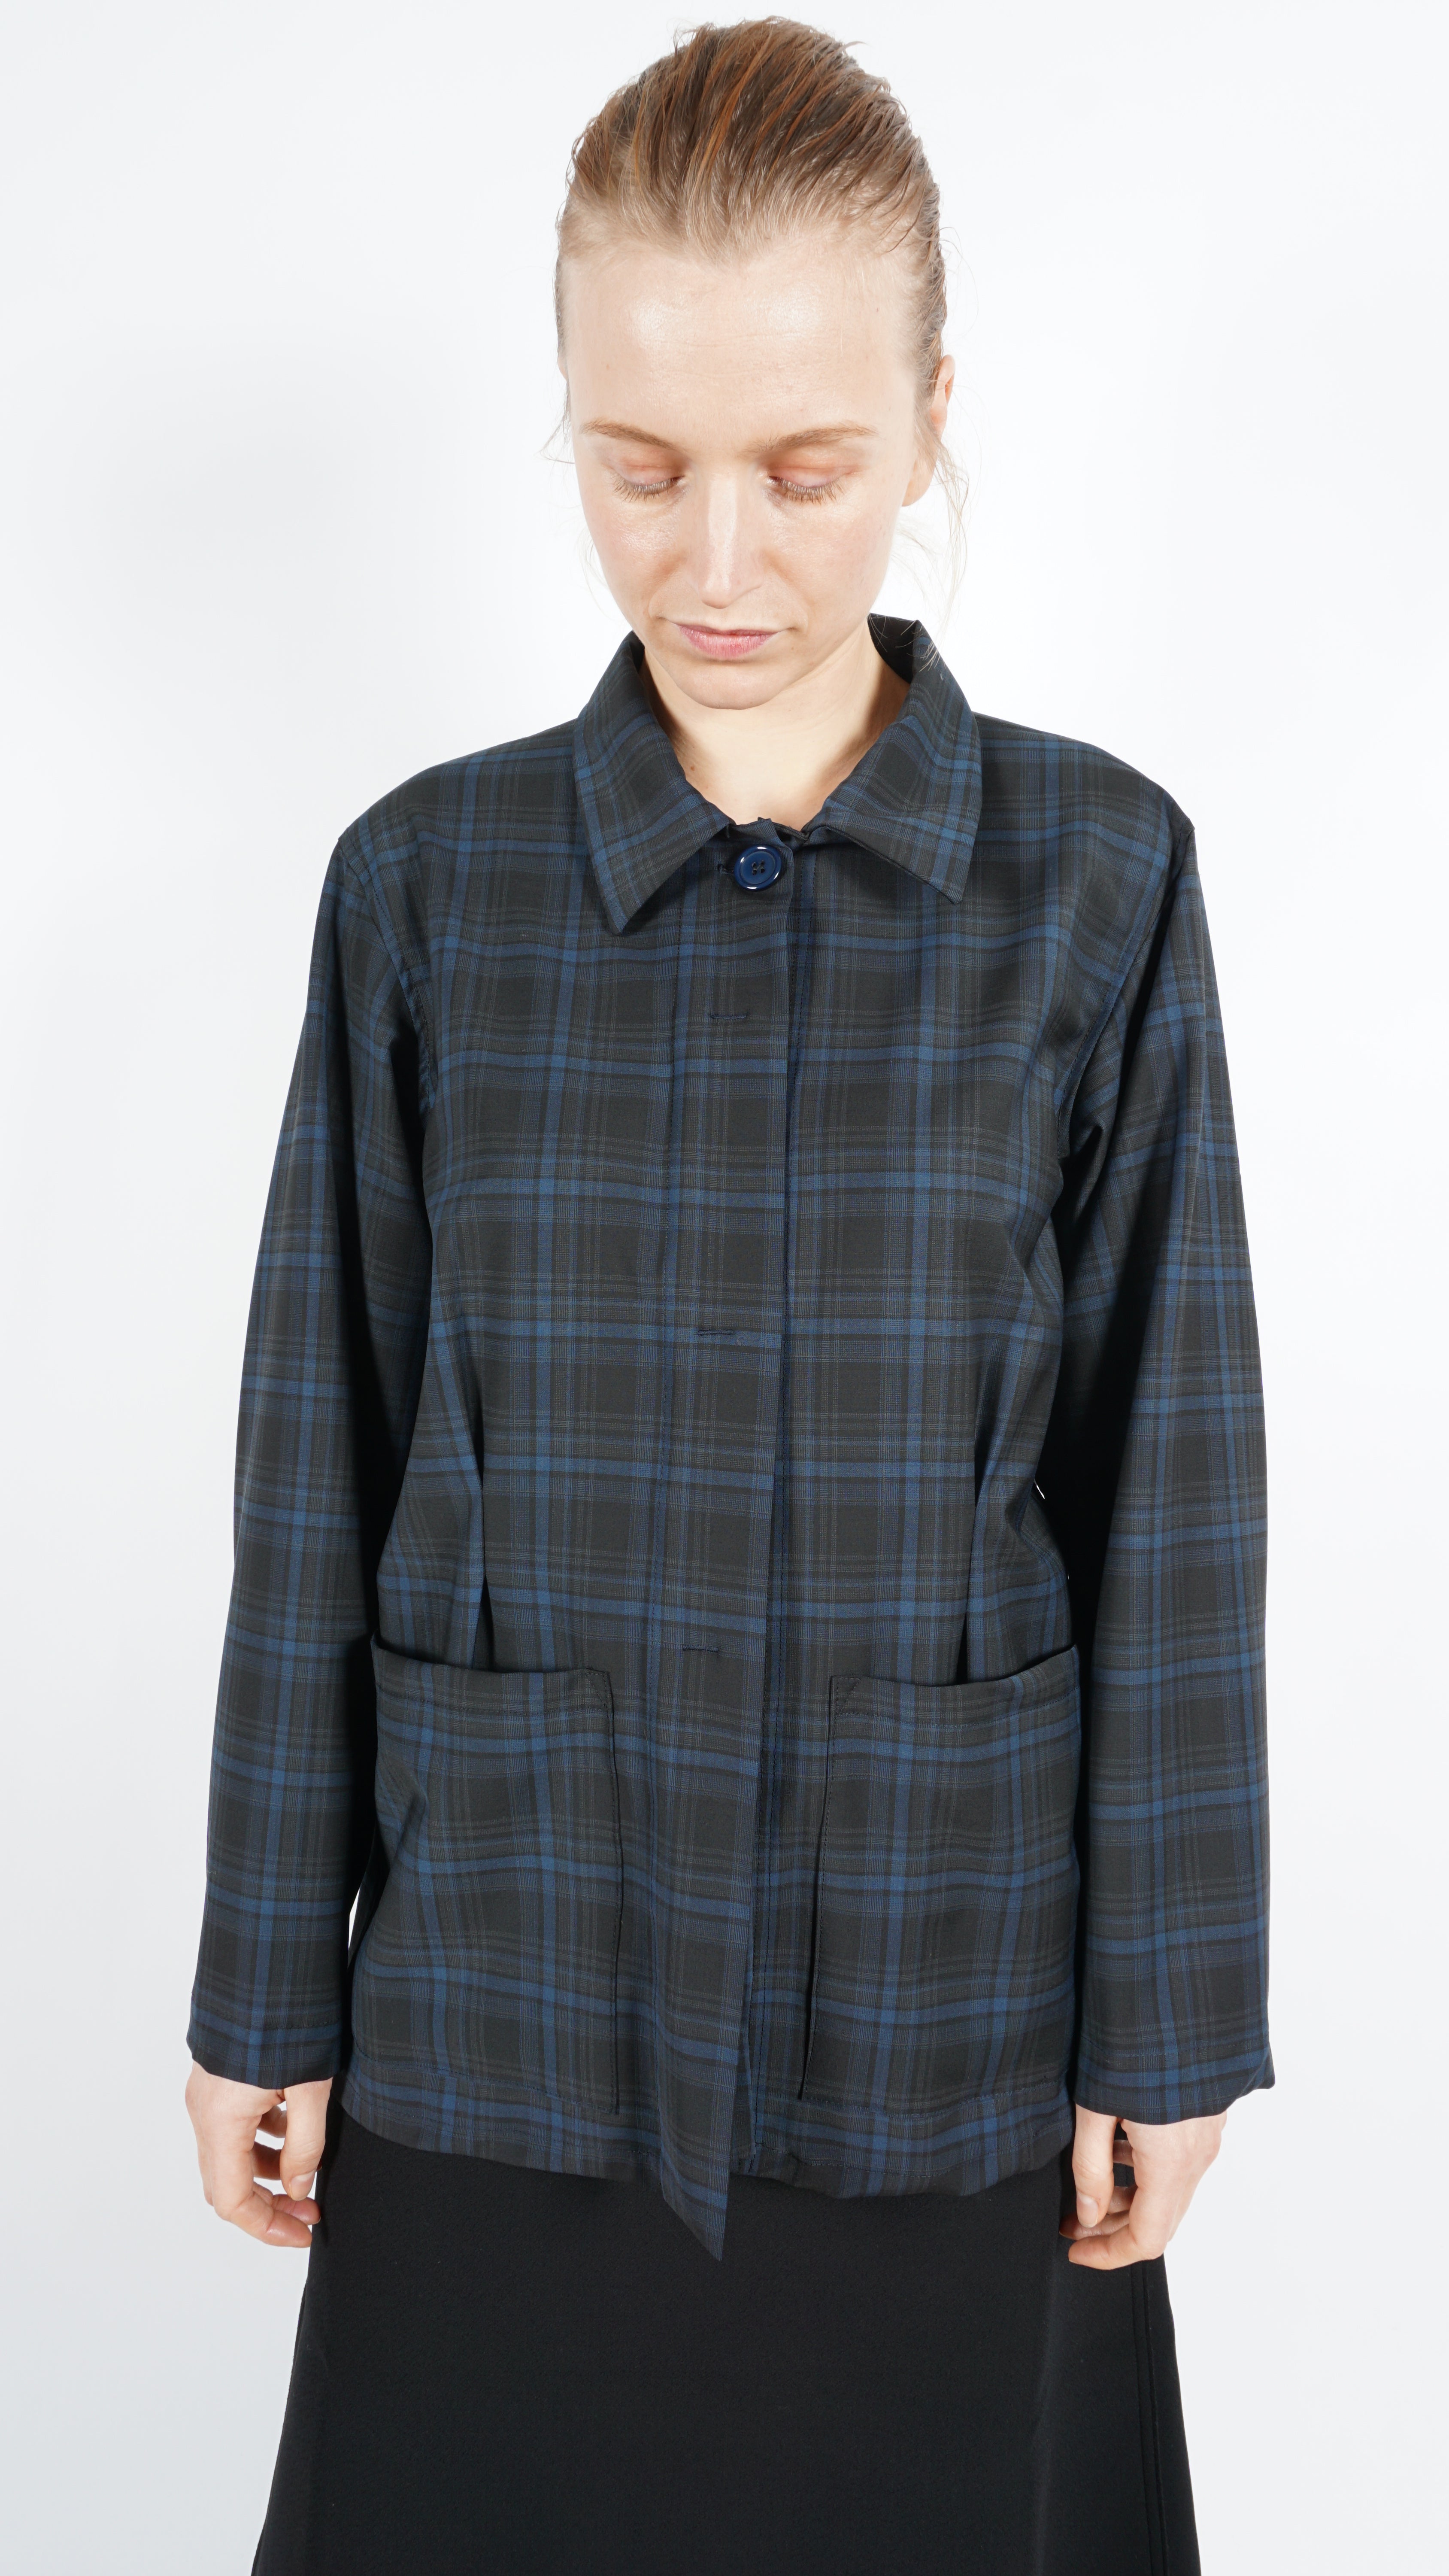 Checkered jacket by Christian L'enfant